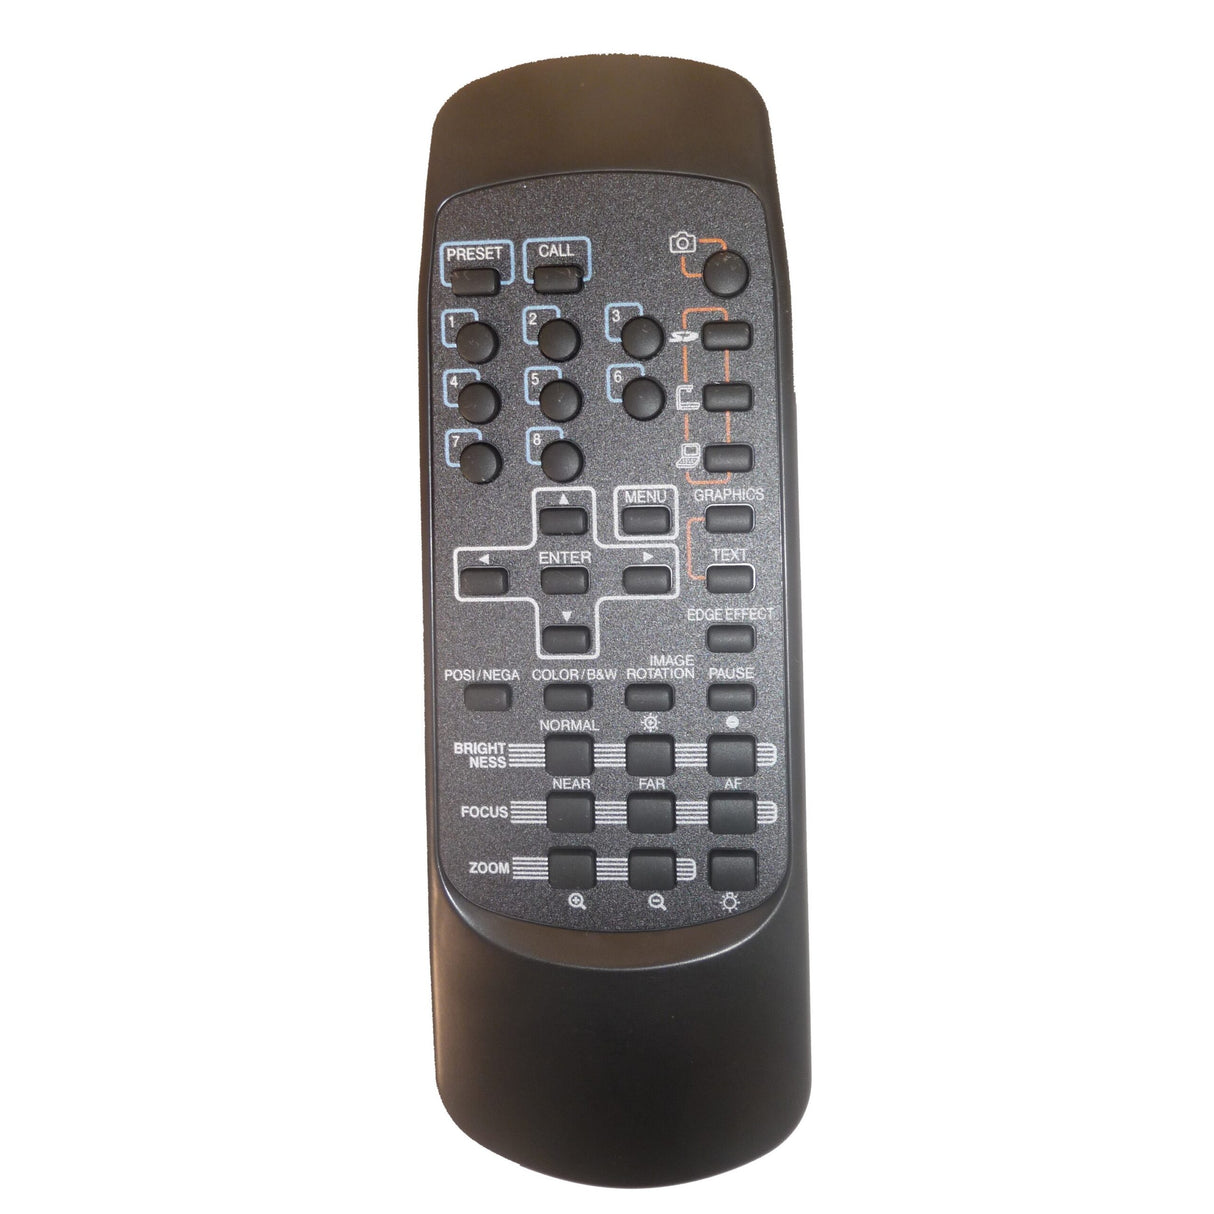 Elmo 4K20775 Remote Control Replacement for P100/P100N